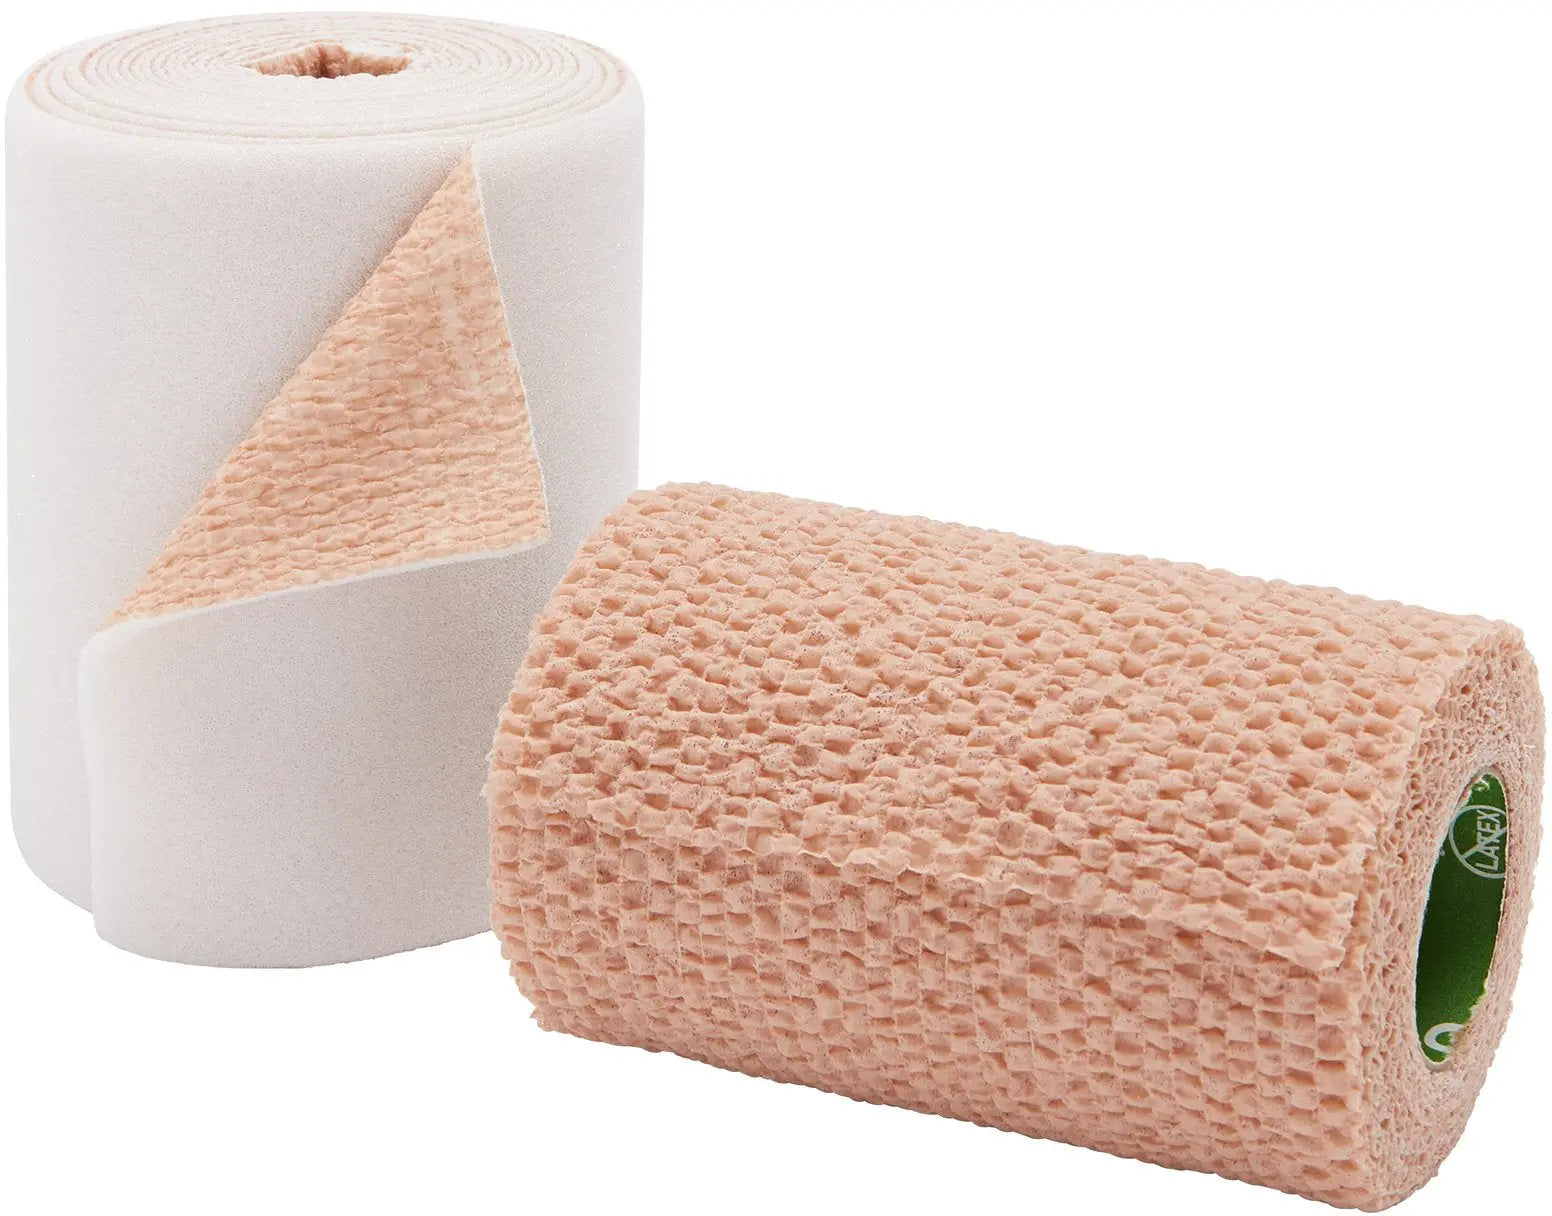 Buy Elastic Self-Adherent Compression Bandage from Canad